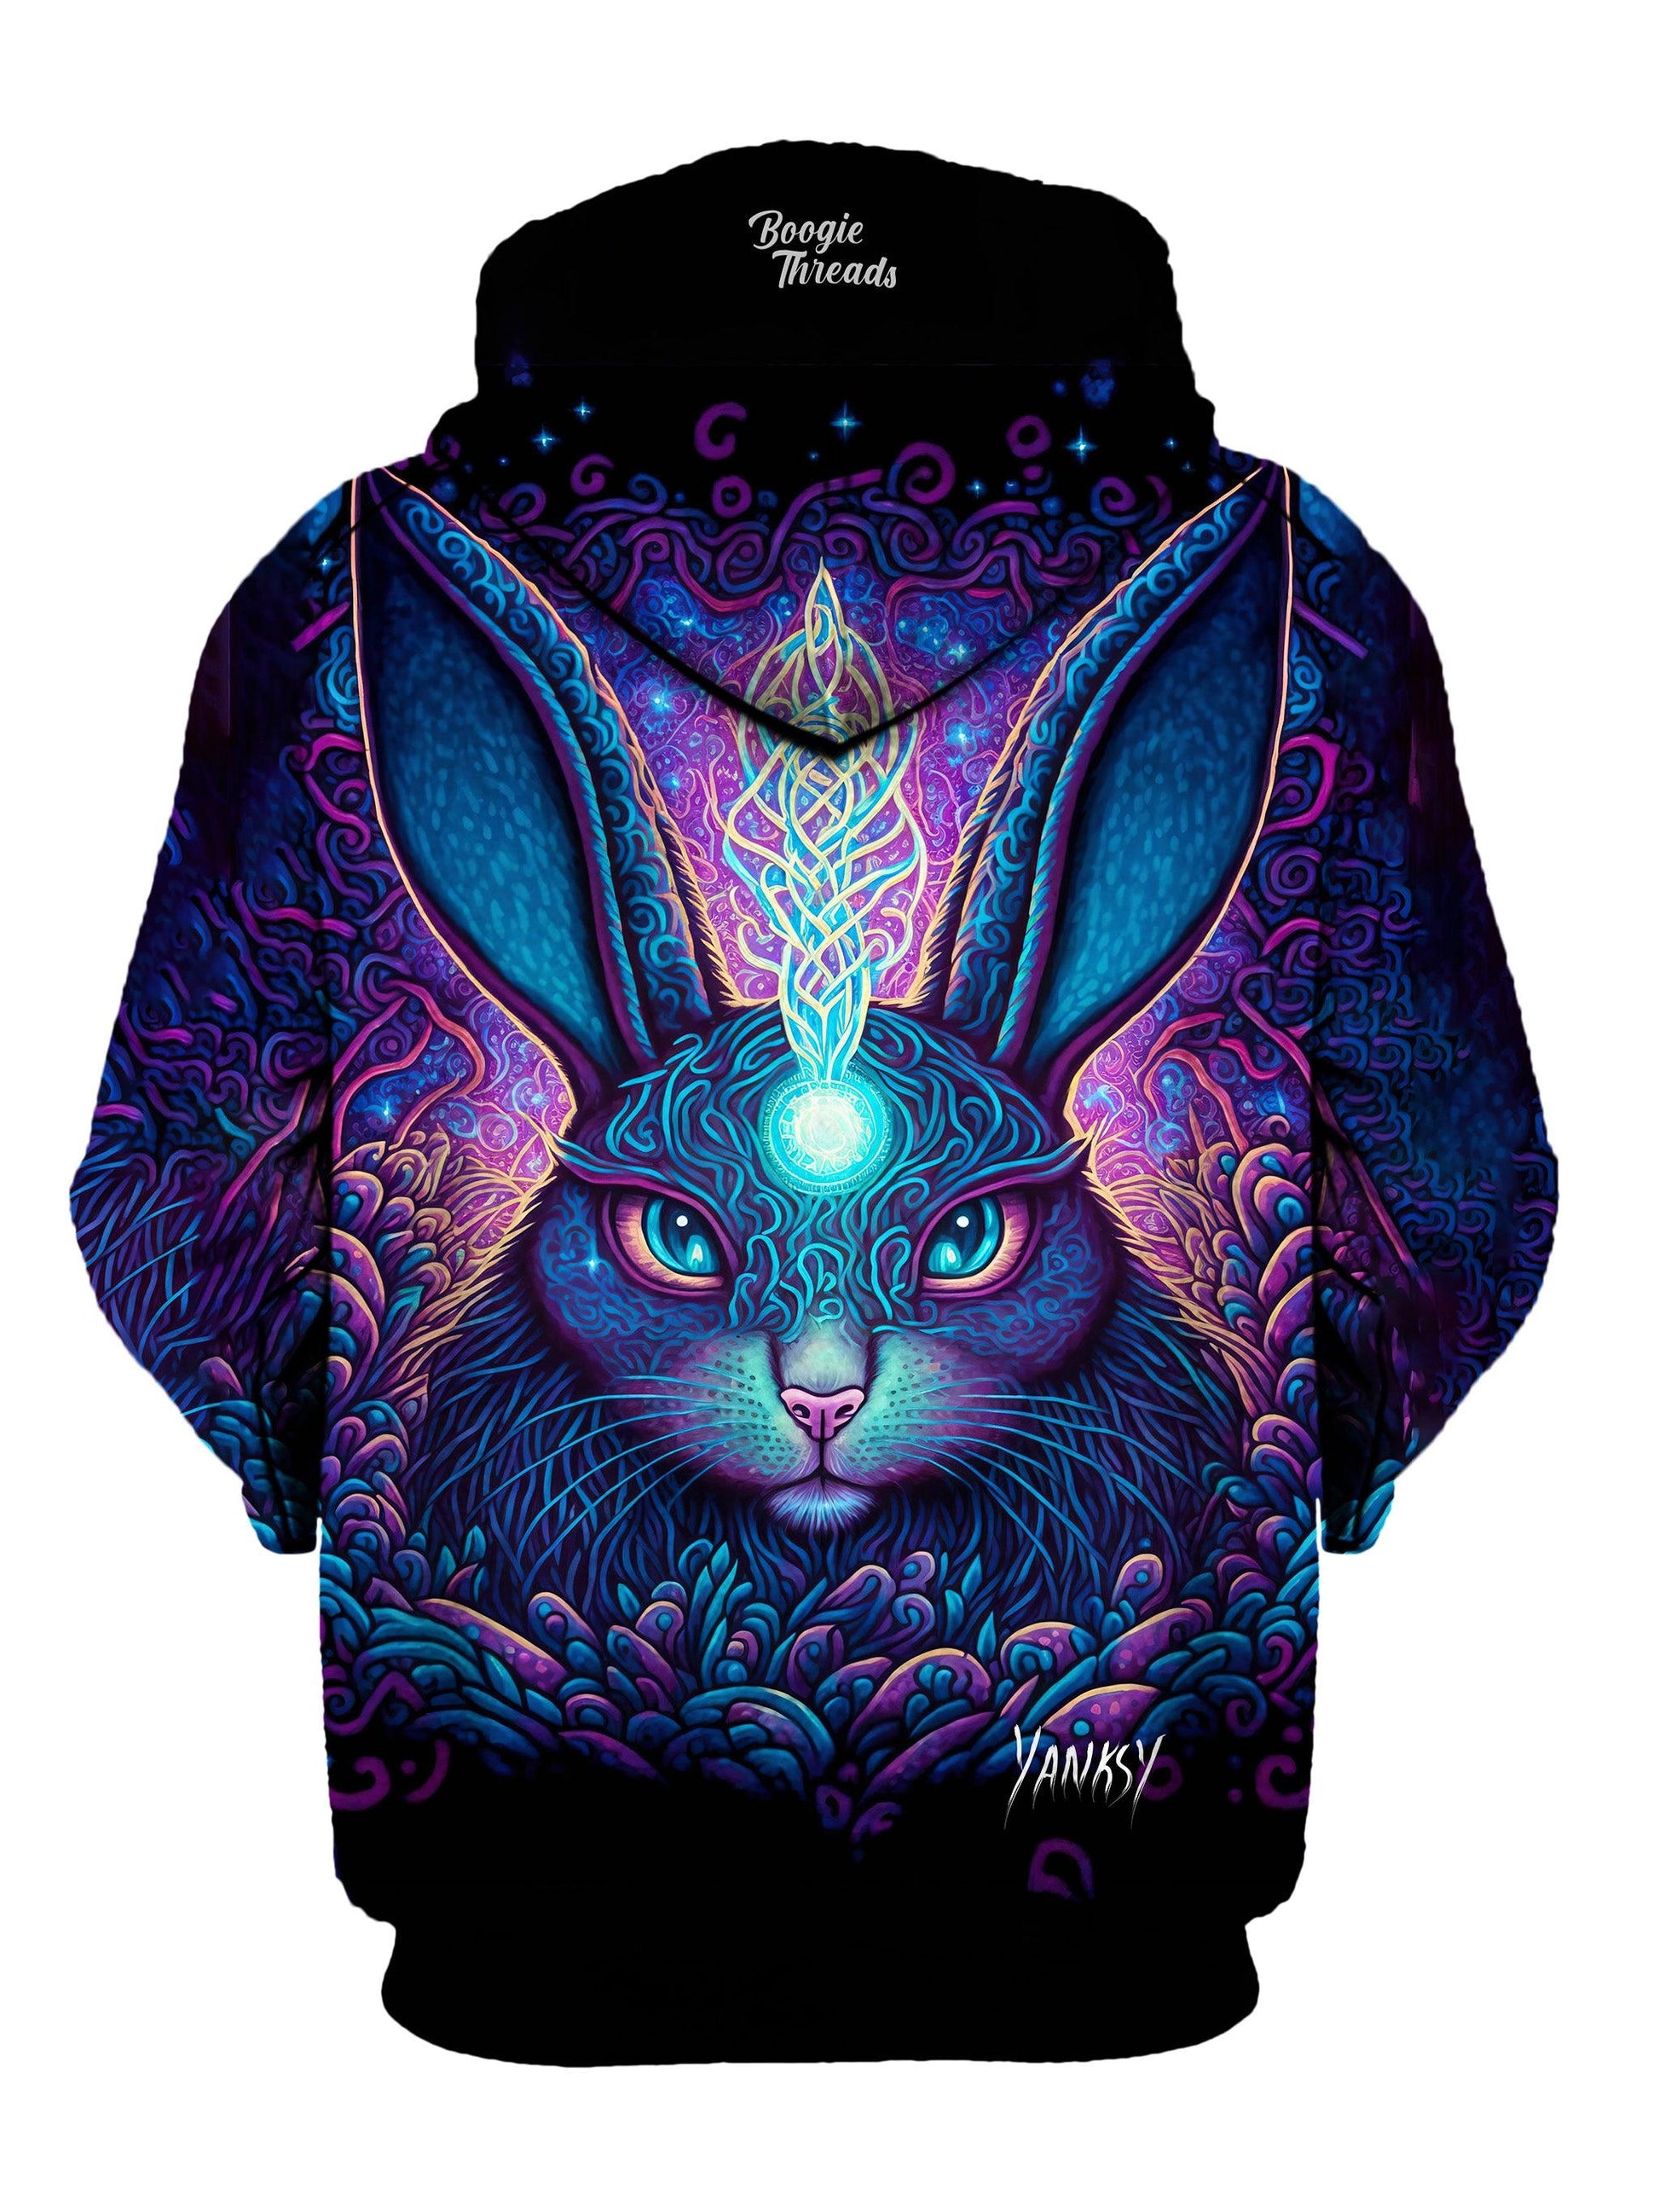 Stay comfortable and stylish all day and night at festivals and raves with this pullover hoodie